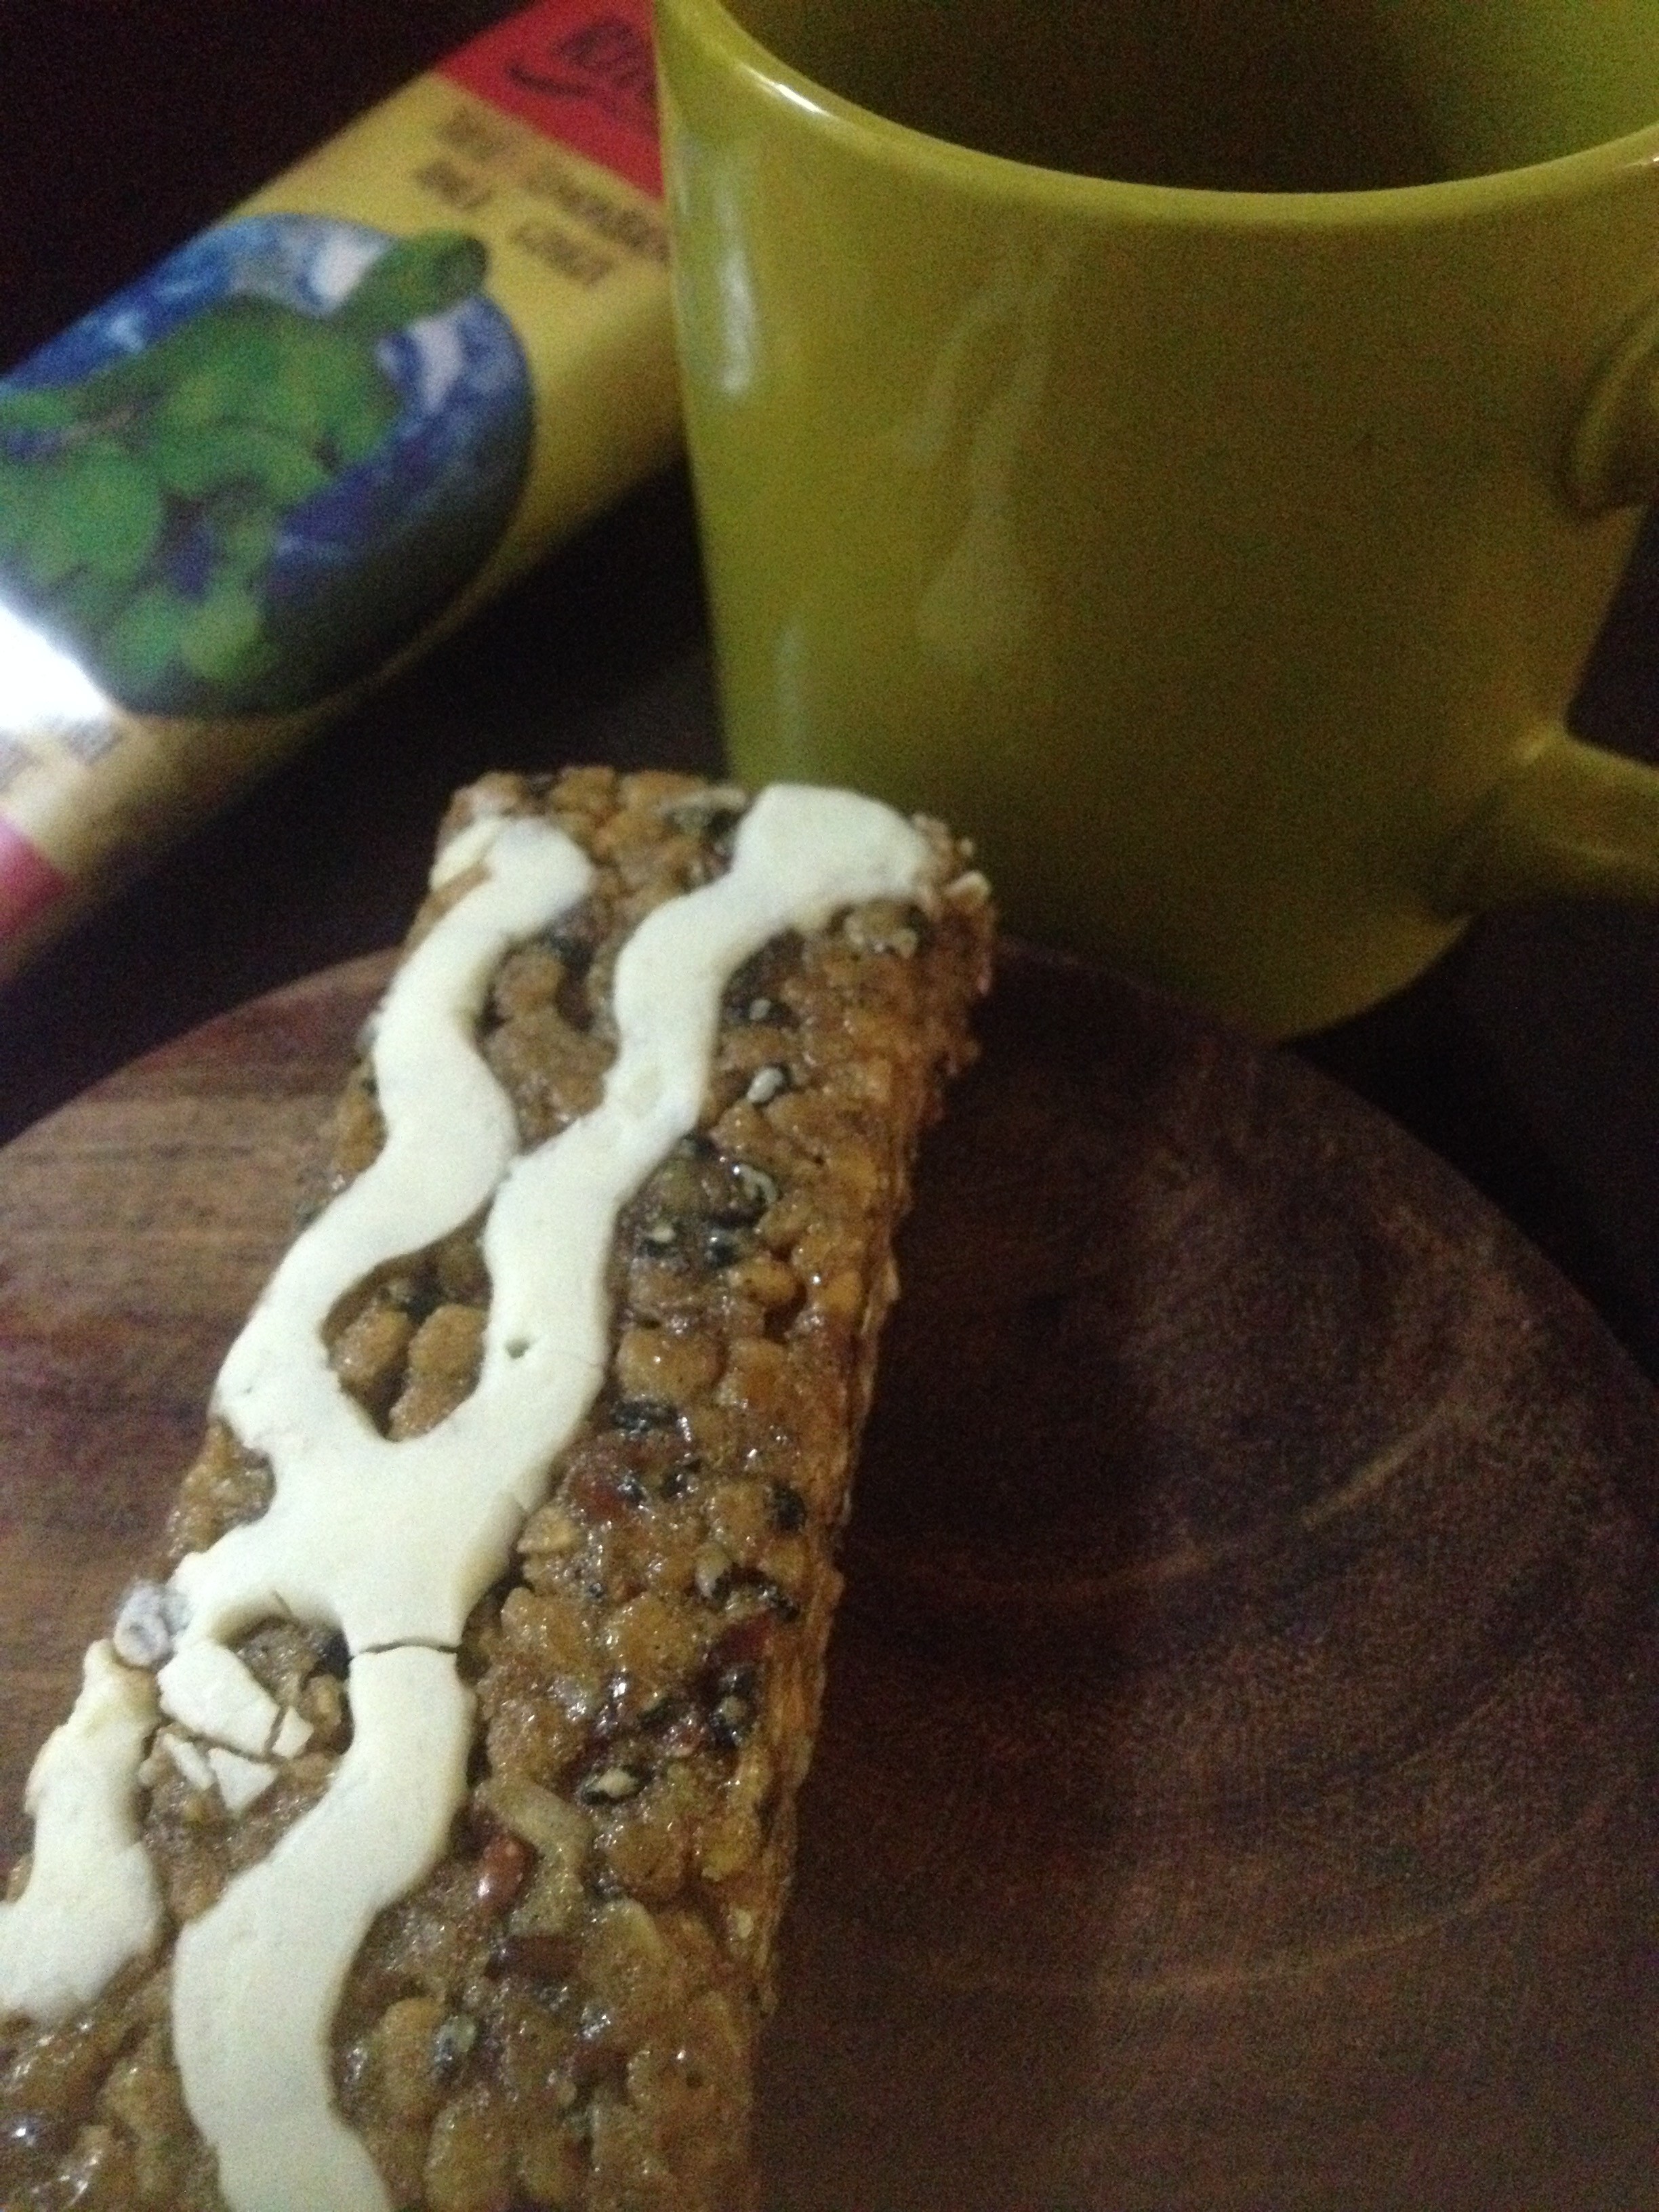 I am not sure what the white icing is but you can see the black sesame seeds and flax seeds in the bar